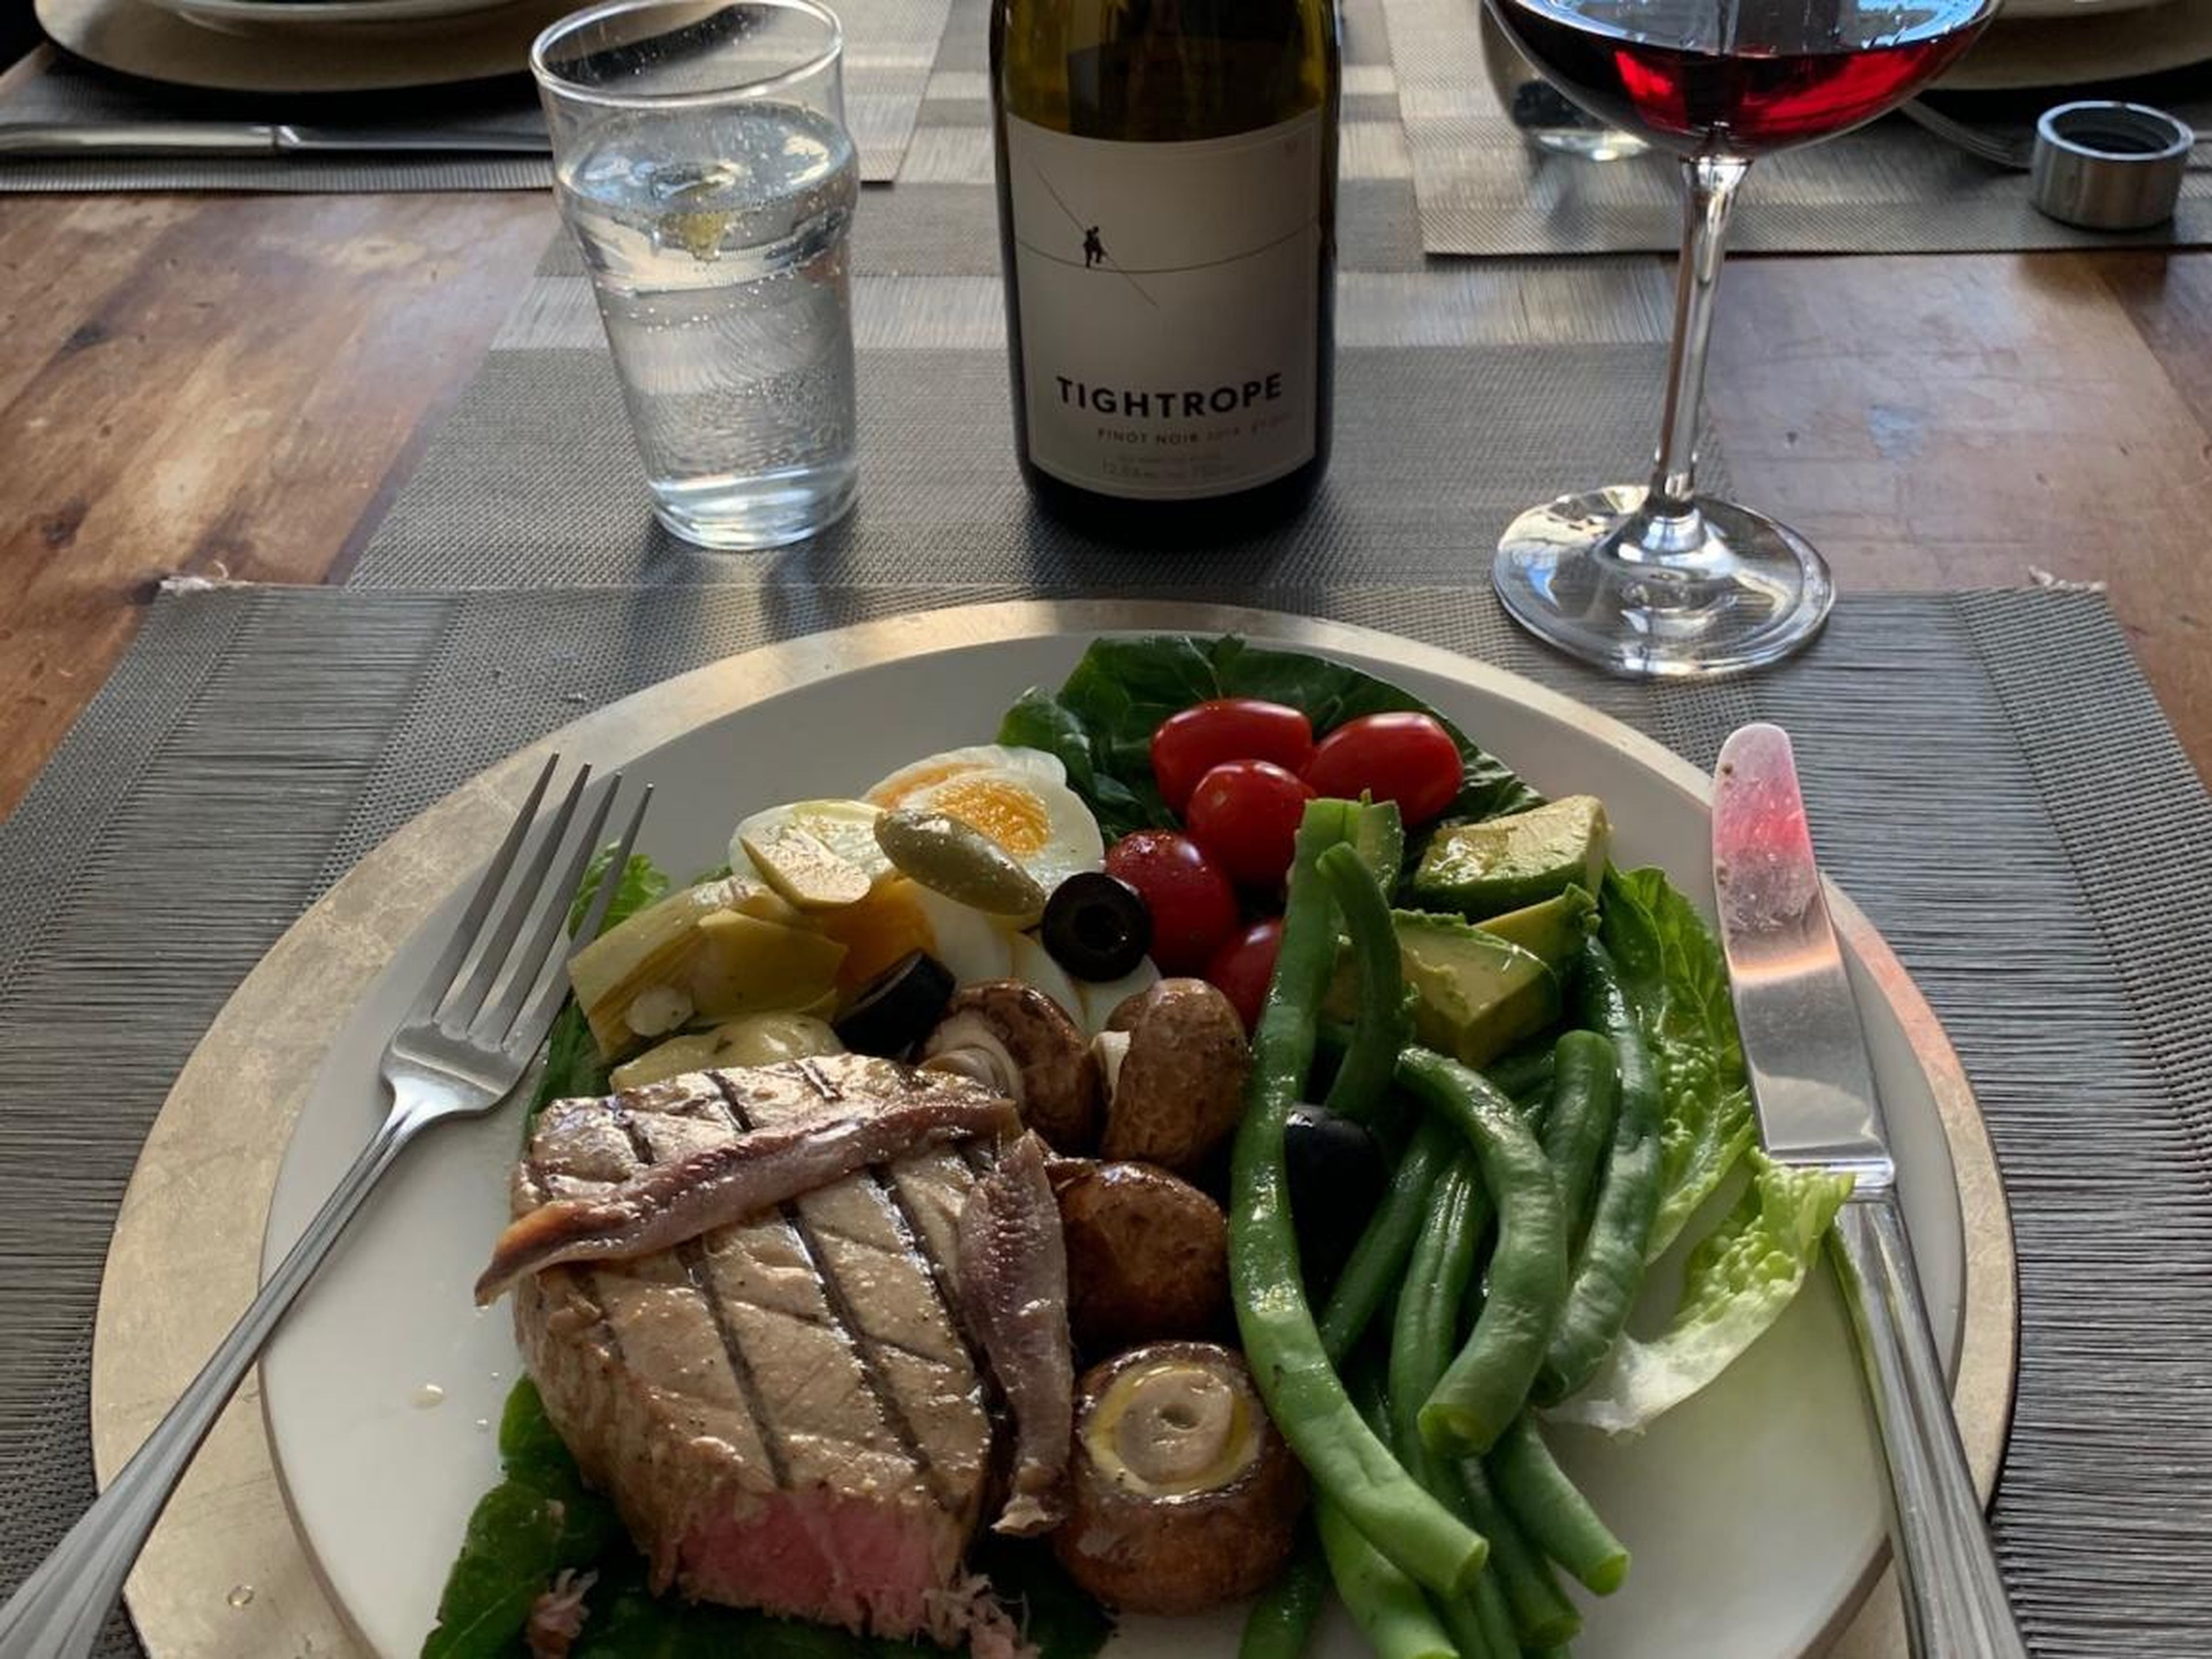 A standard dinner at David Harper's house: a tuna nicoise salad (hold the potatoes) served with a glass of red wine.